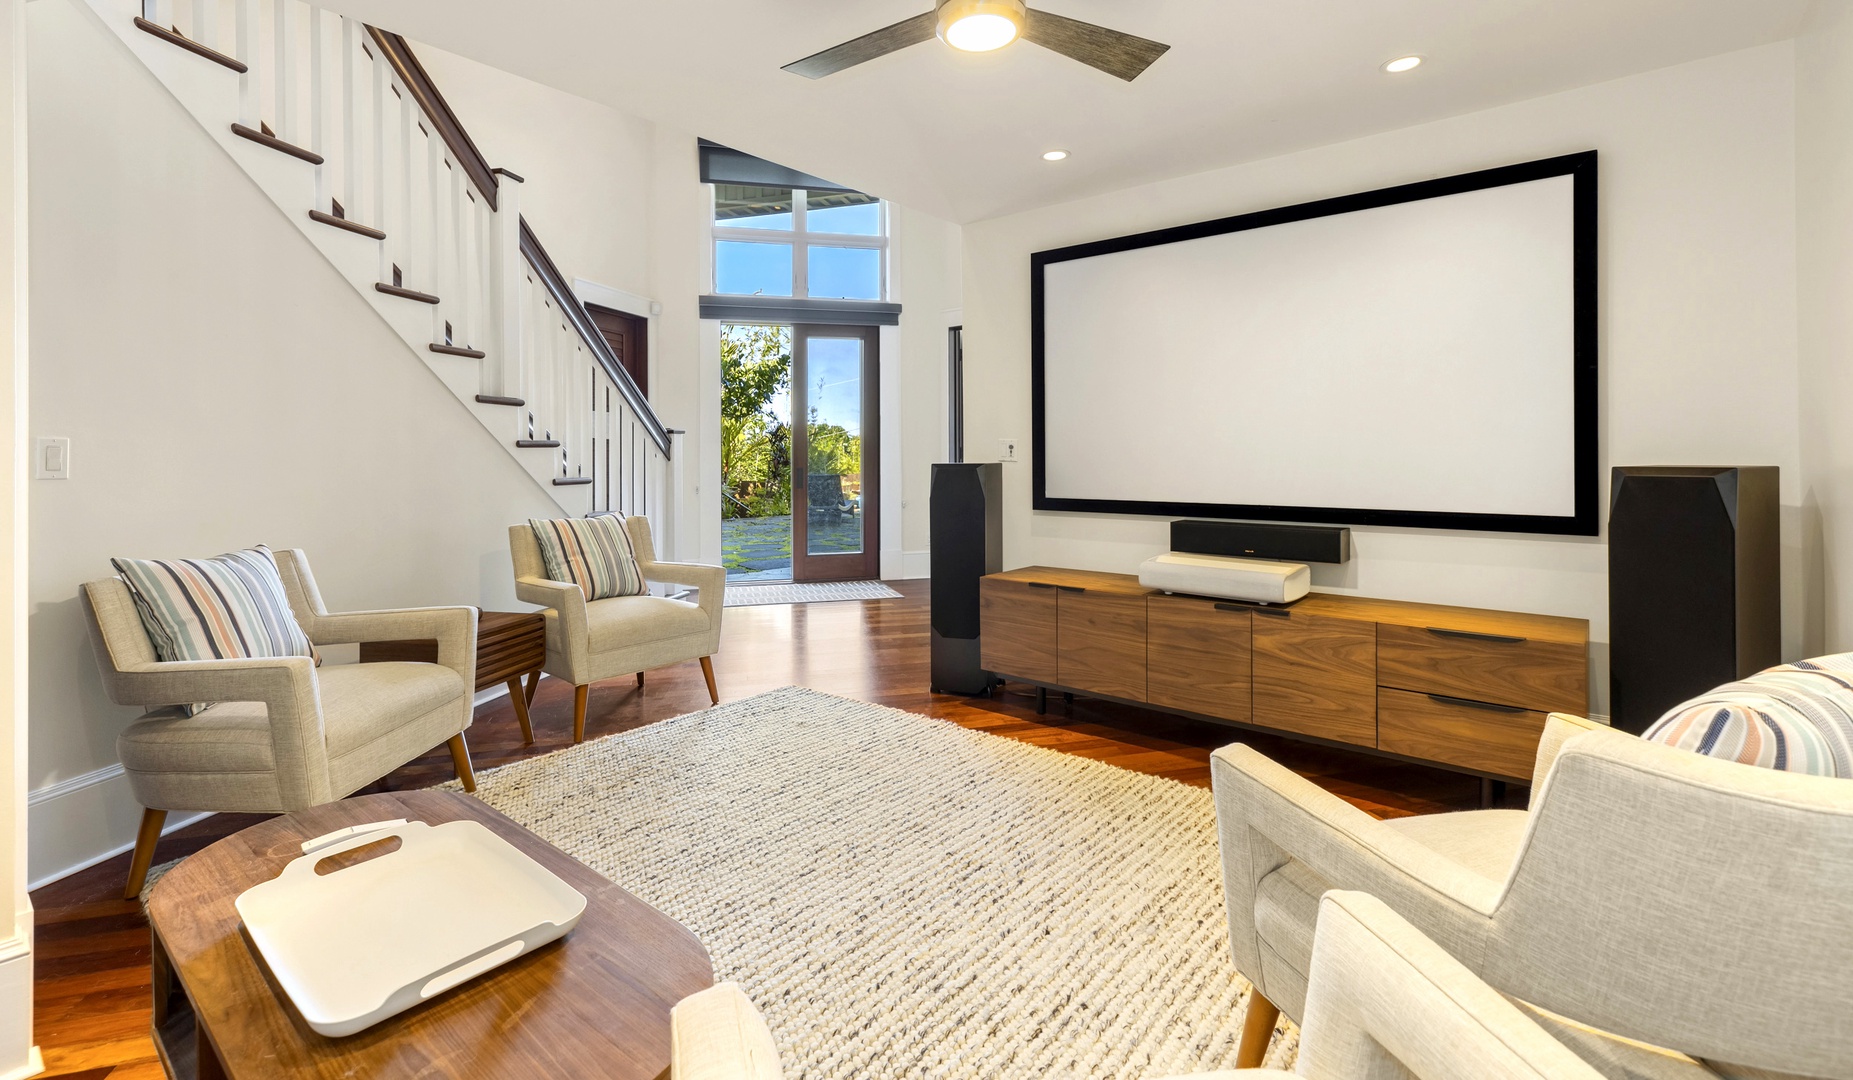 Kailua Vacation Rentals, Lanikai Villa - Head down the stairs and you'll also find a den with a large-screen TV and plenty of seating - Ideal for a movie night!